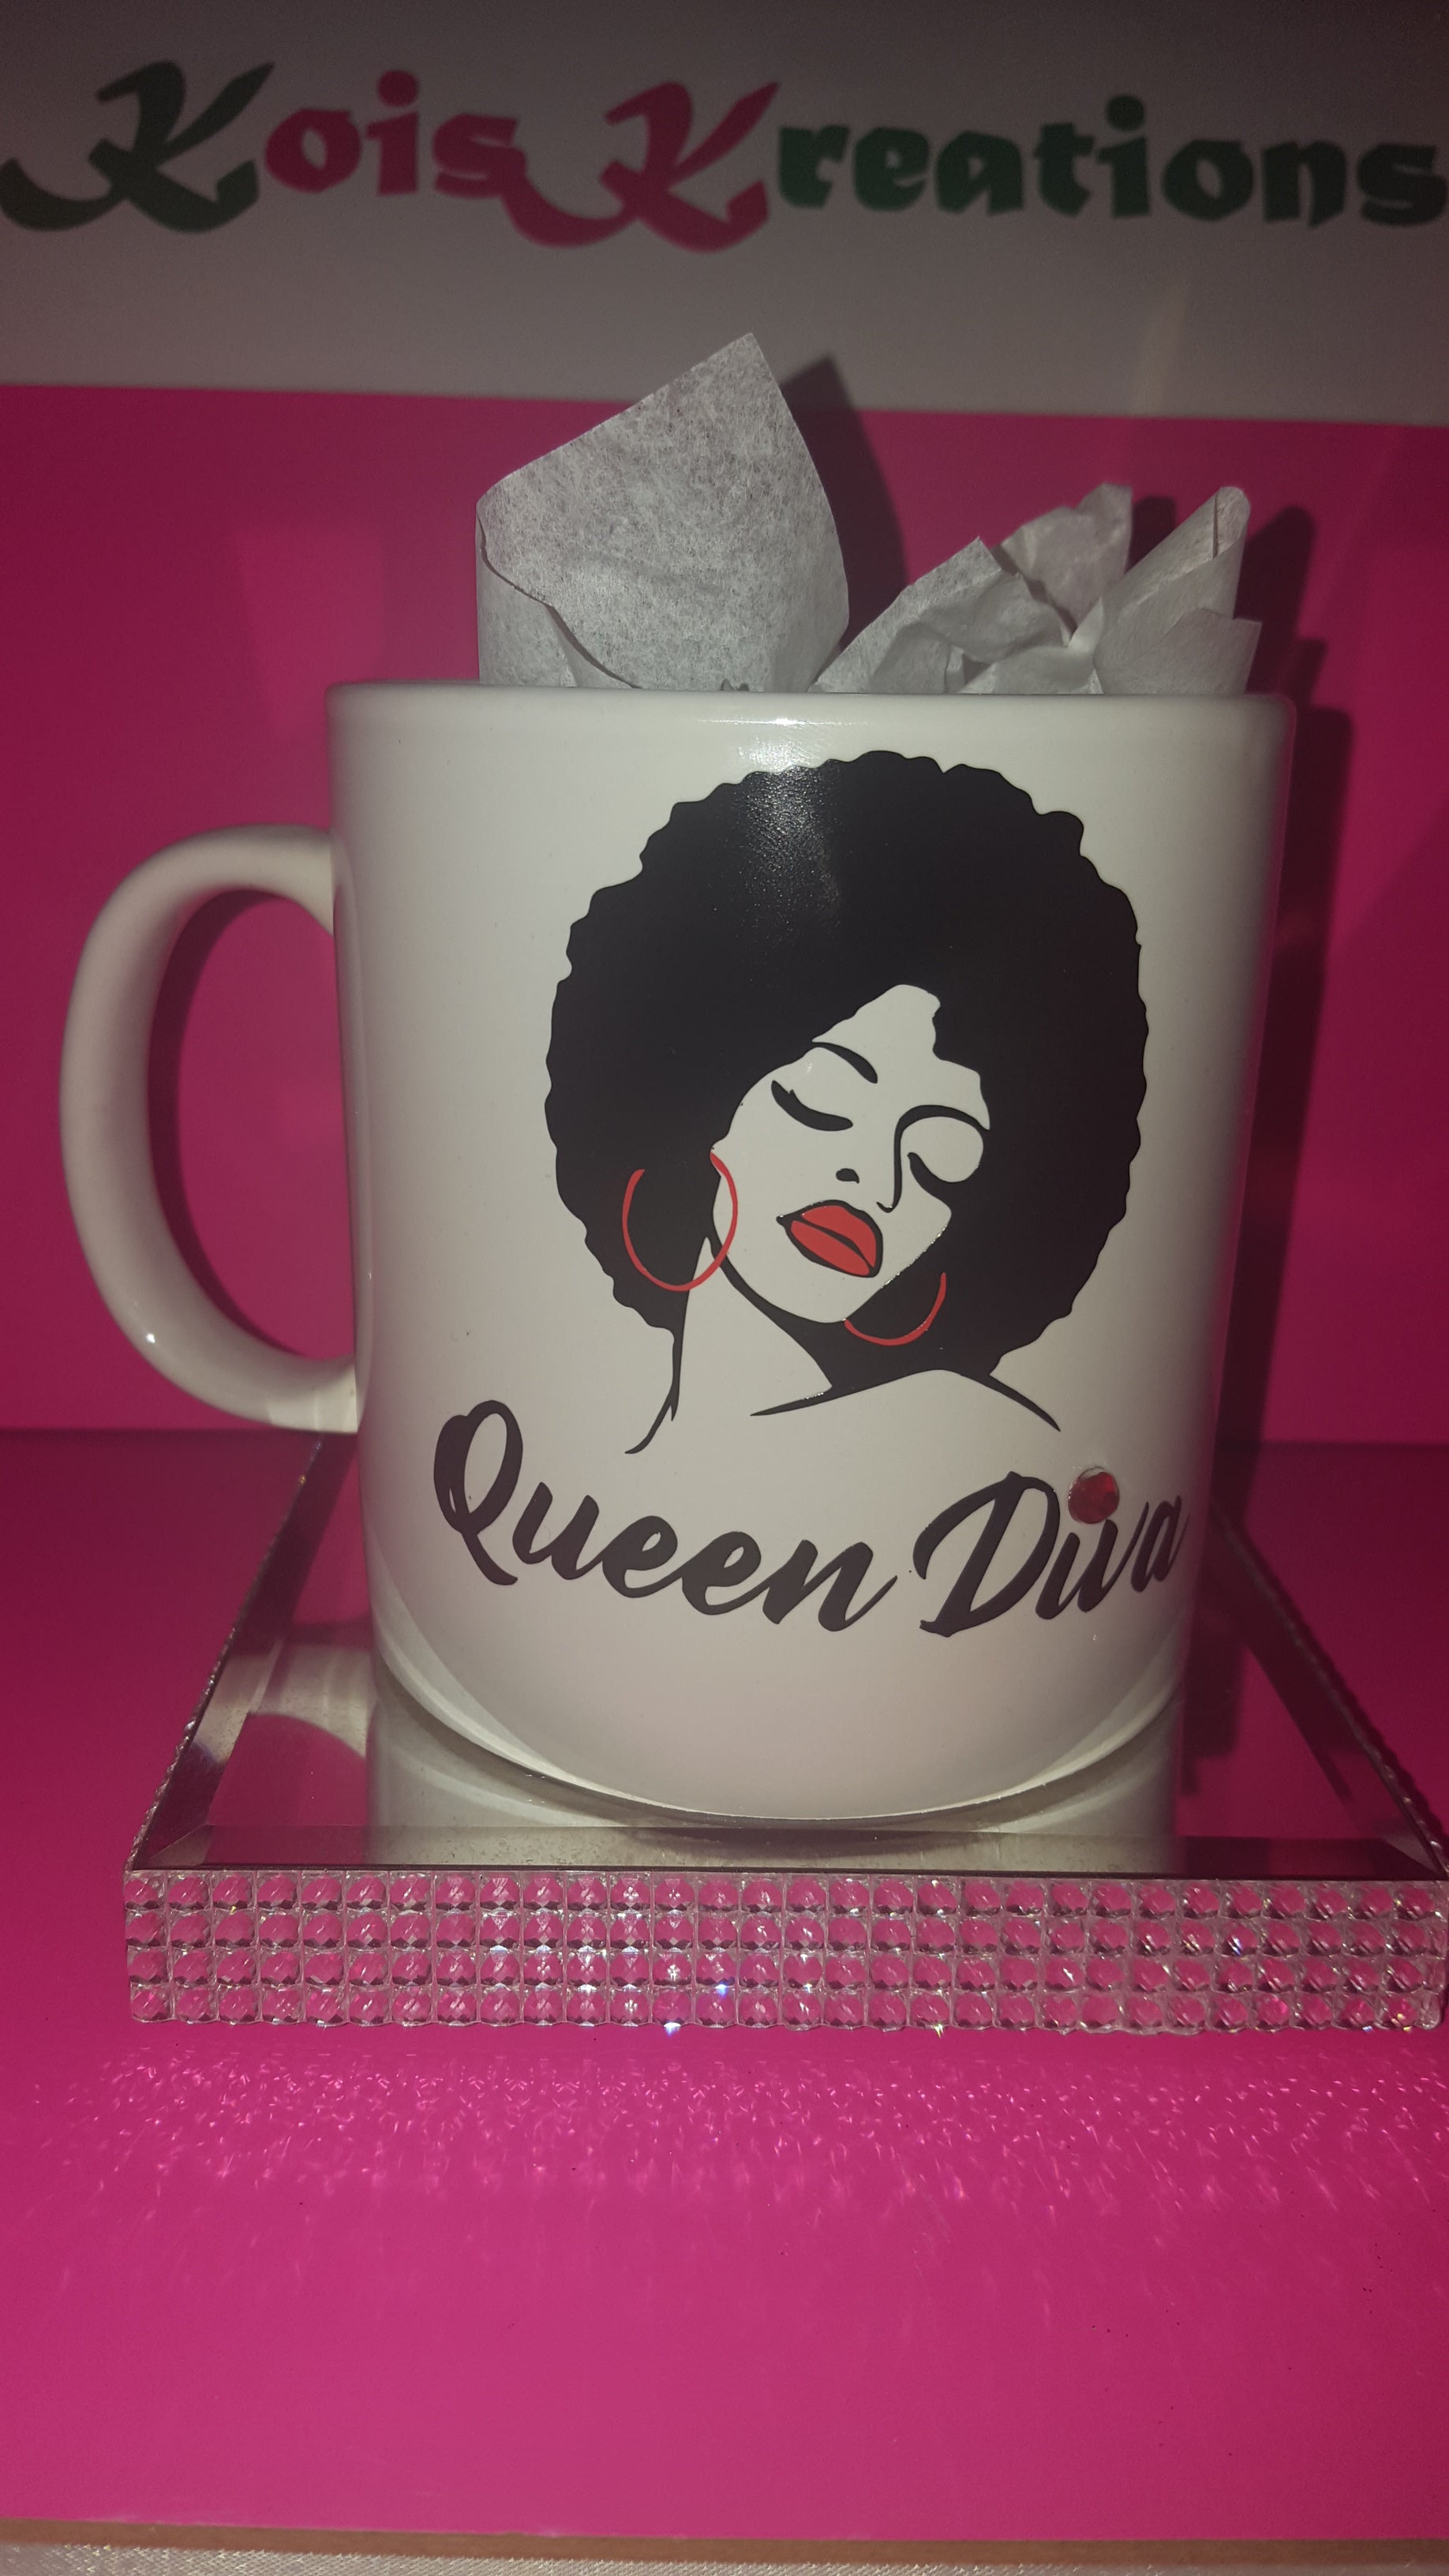 "Queen Diva" Mugg (20oz) - She is Blessed